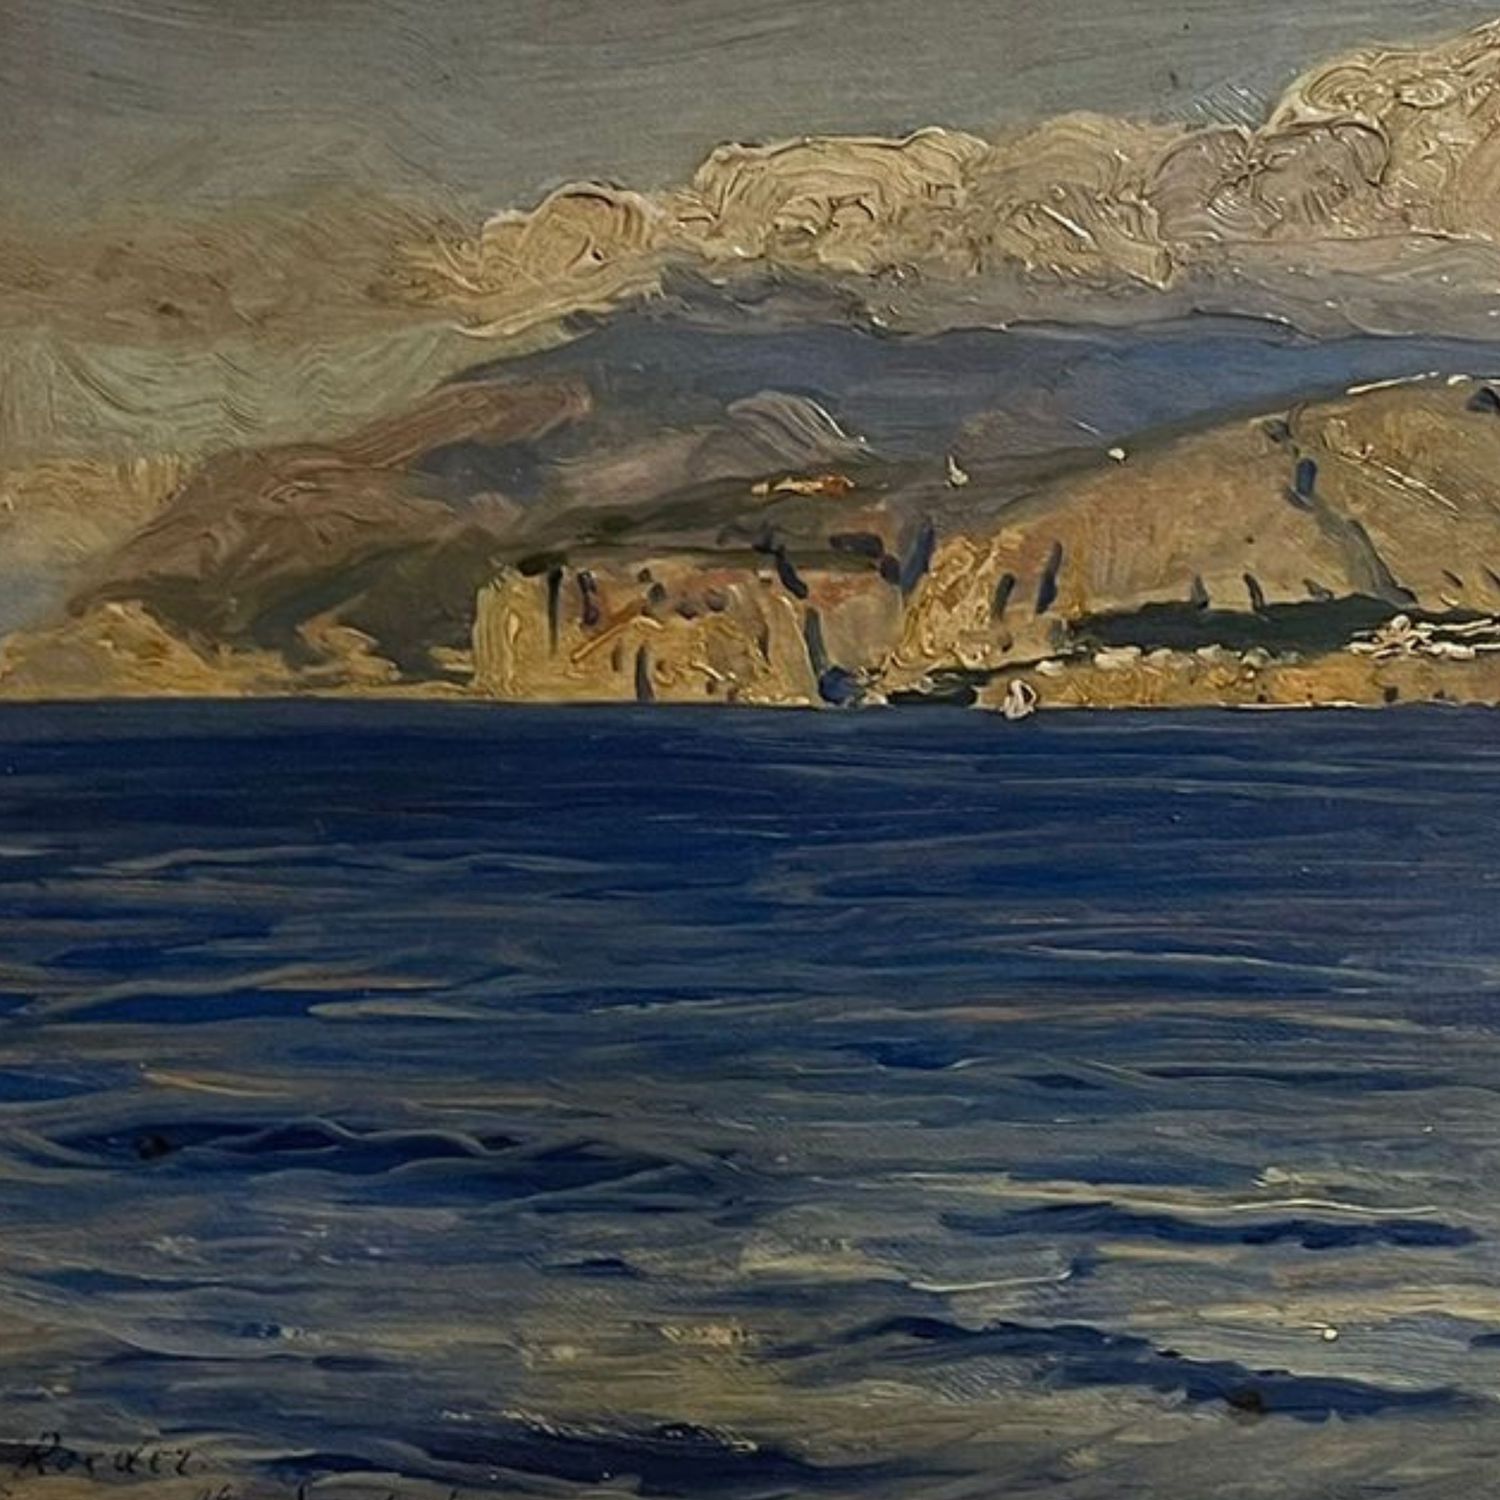 Seascape - Max Roeder (1866 - 1947) - Image 2 of 7